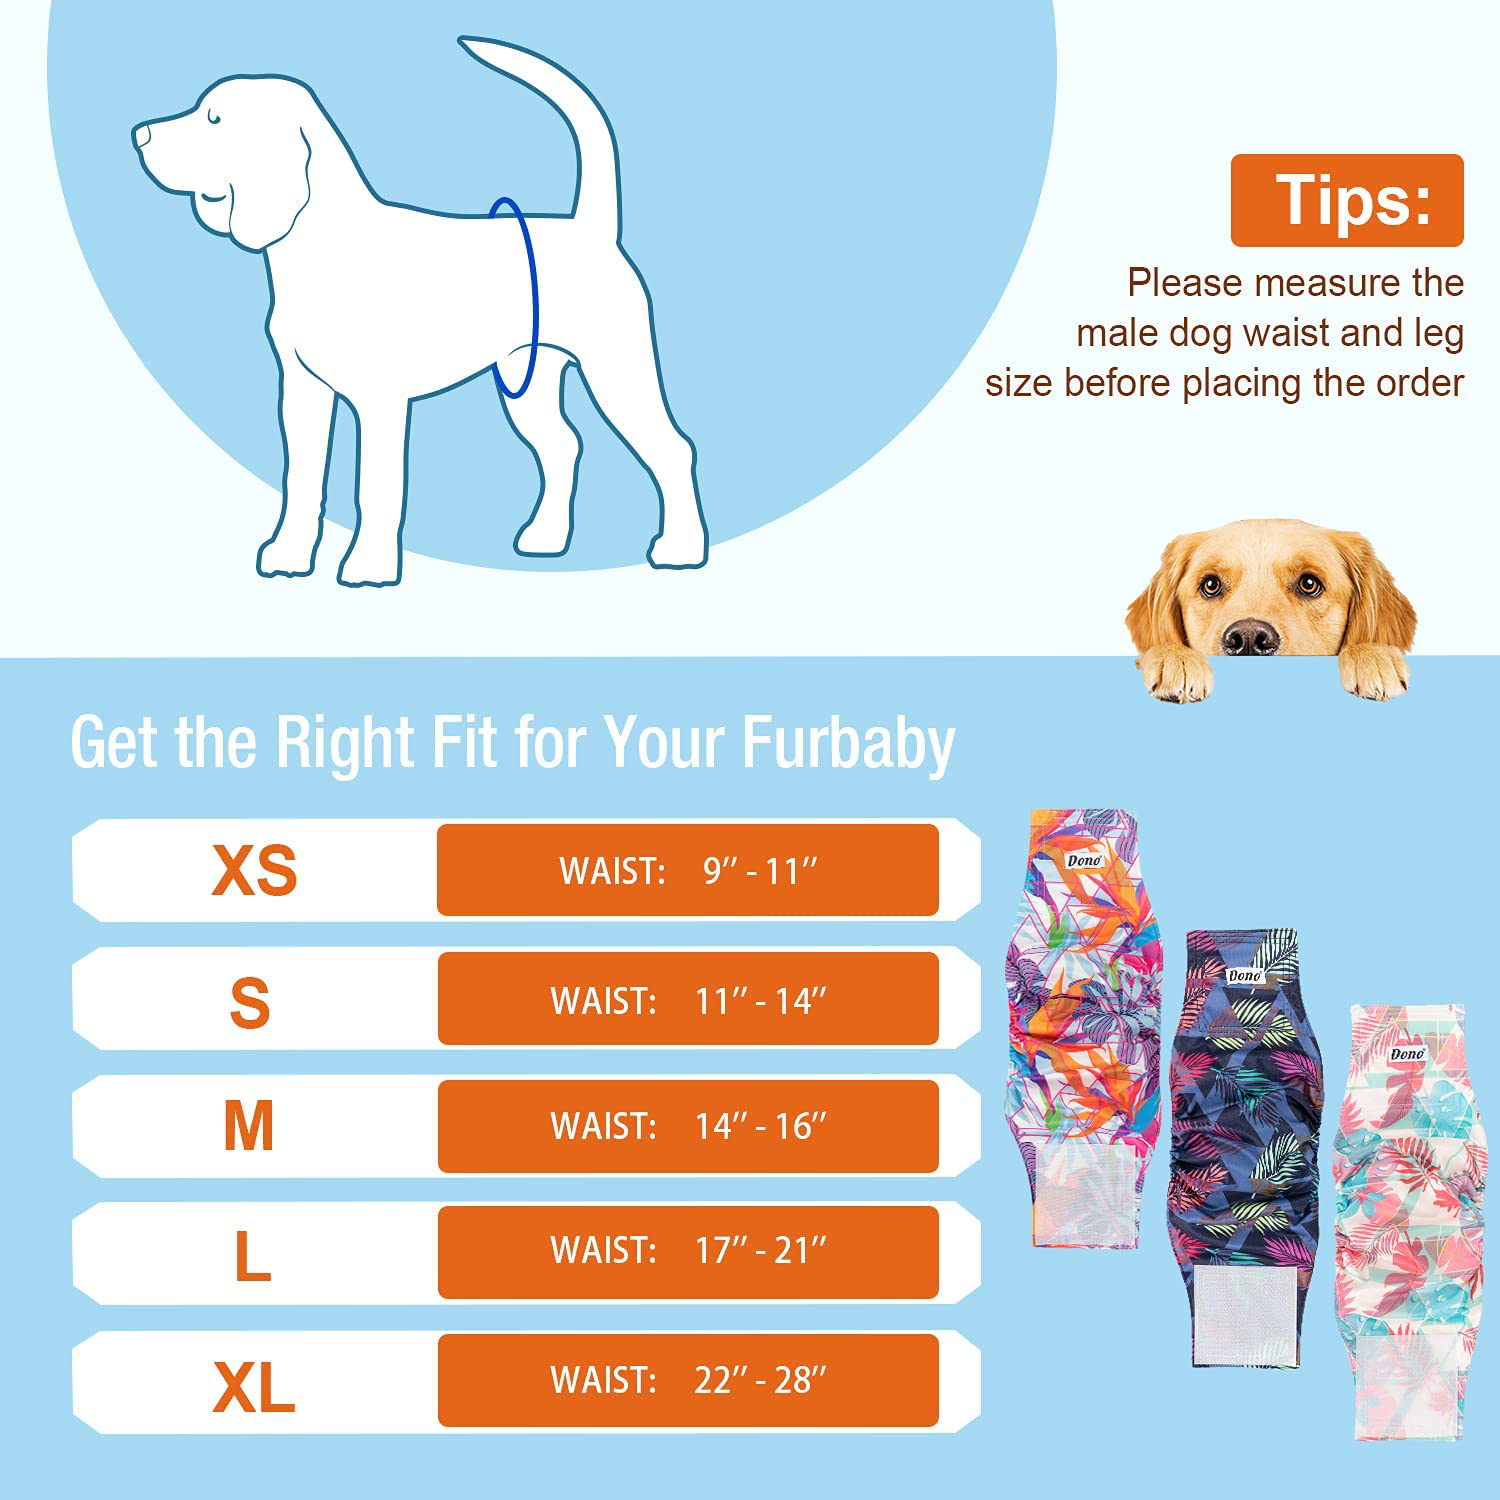  Grecle Premium Male Dog Wraps - High Absorbency Male